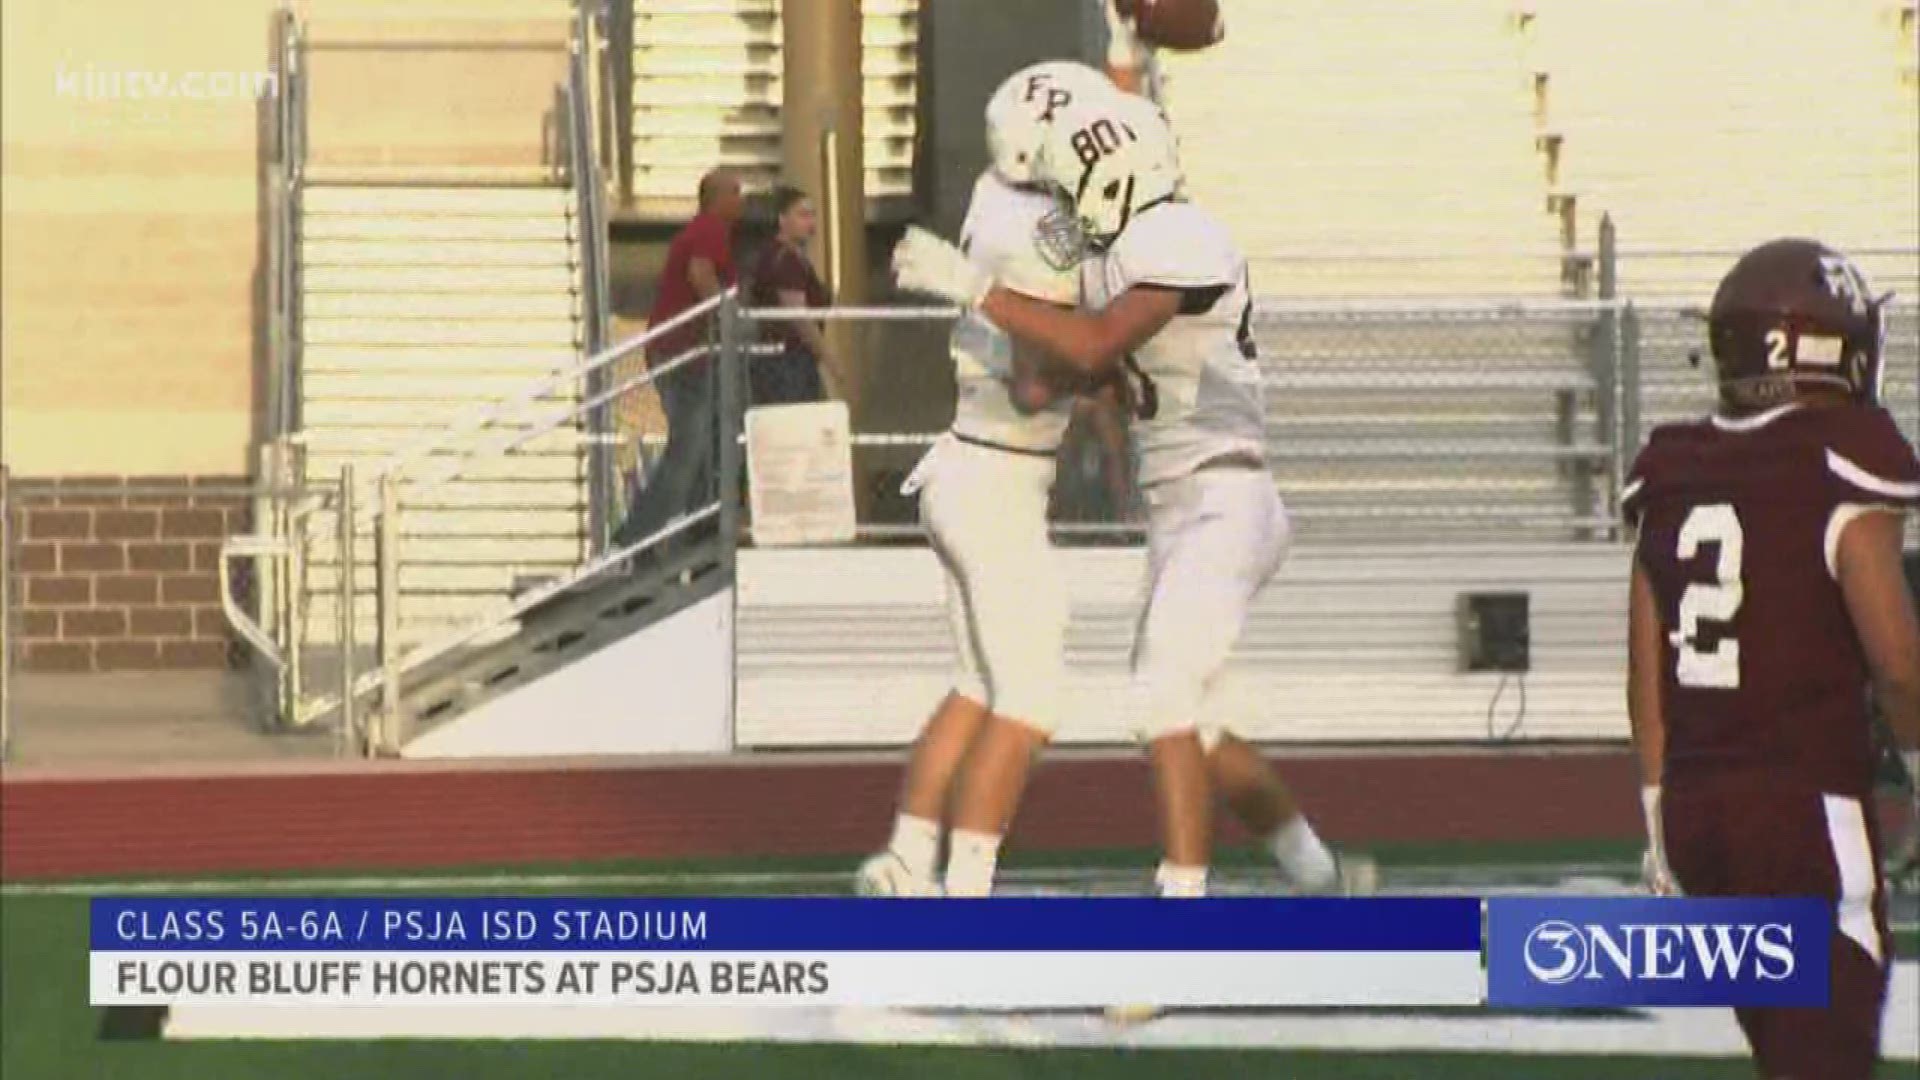 Highlights from Thursday night's first games of the 2019 high school football season!